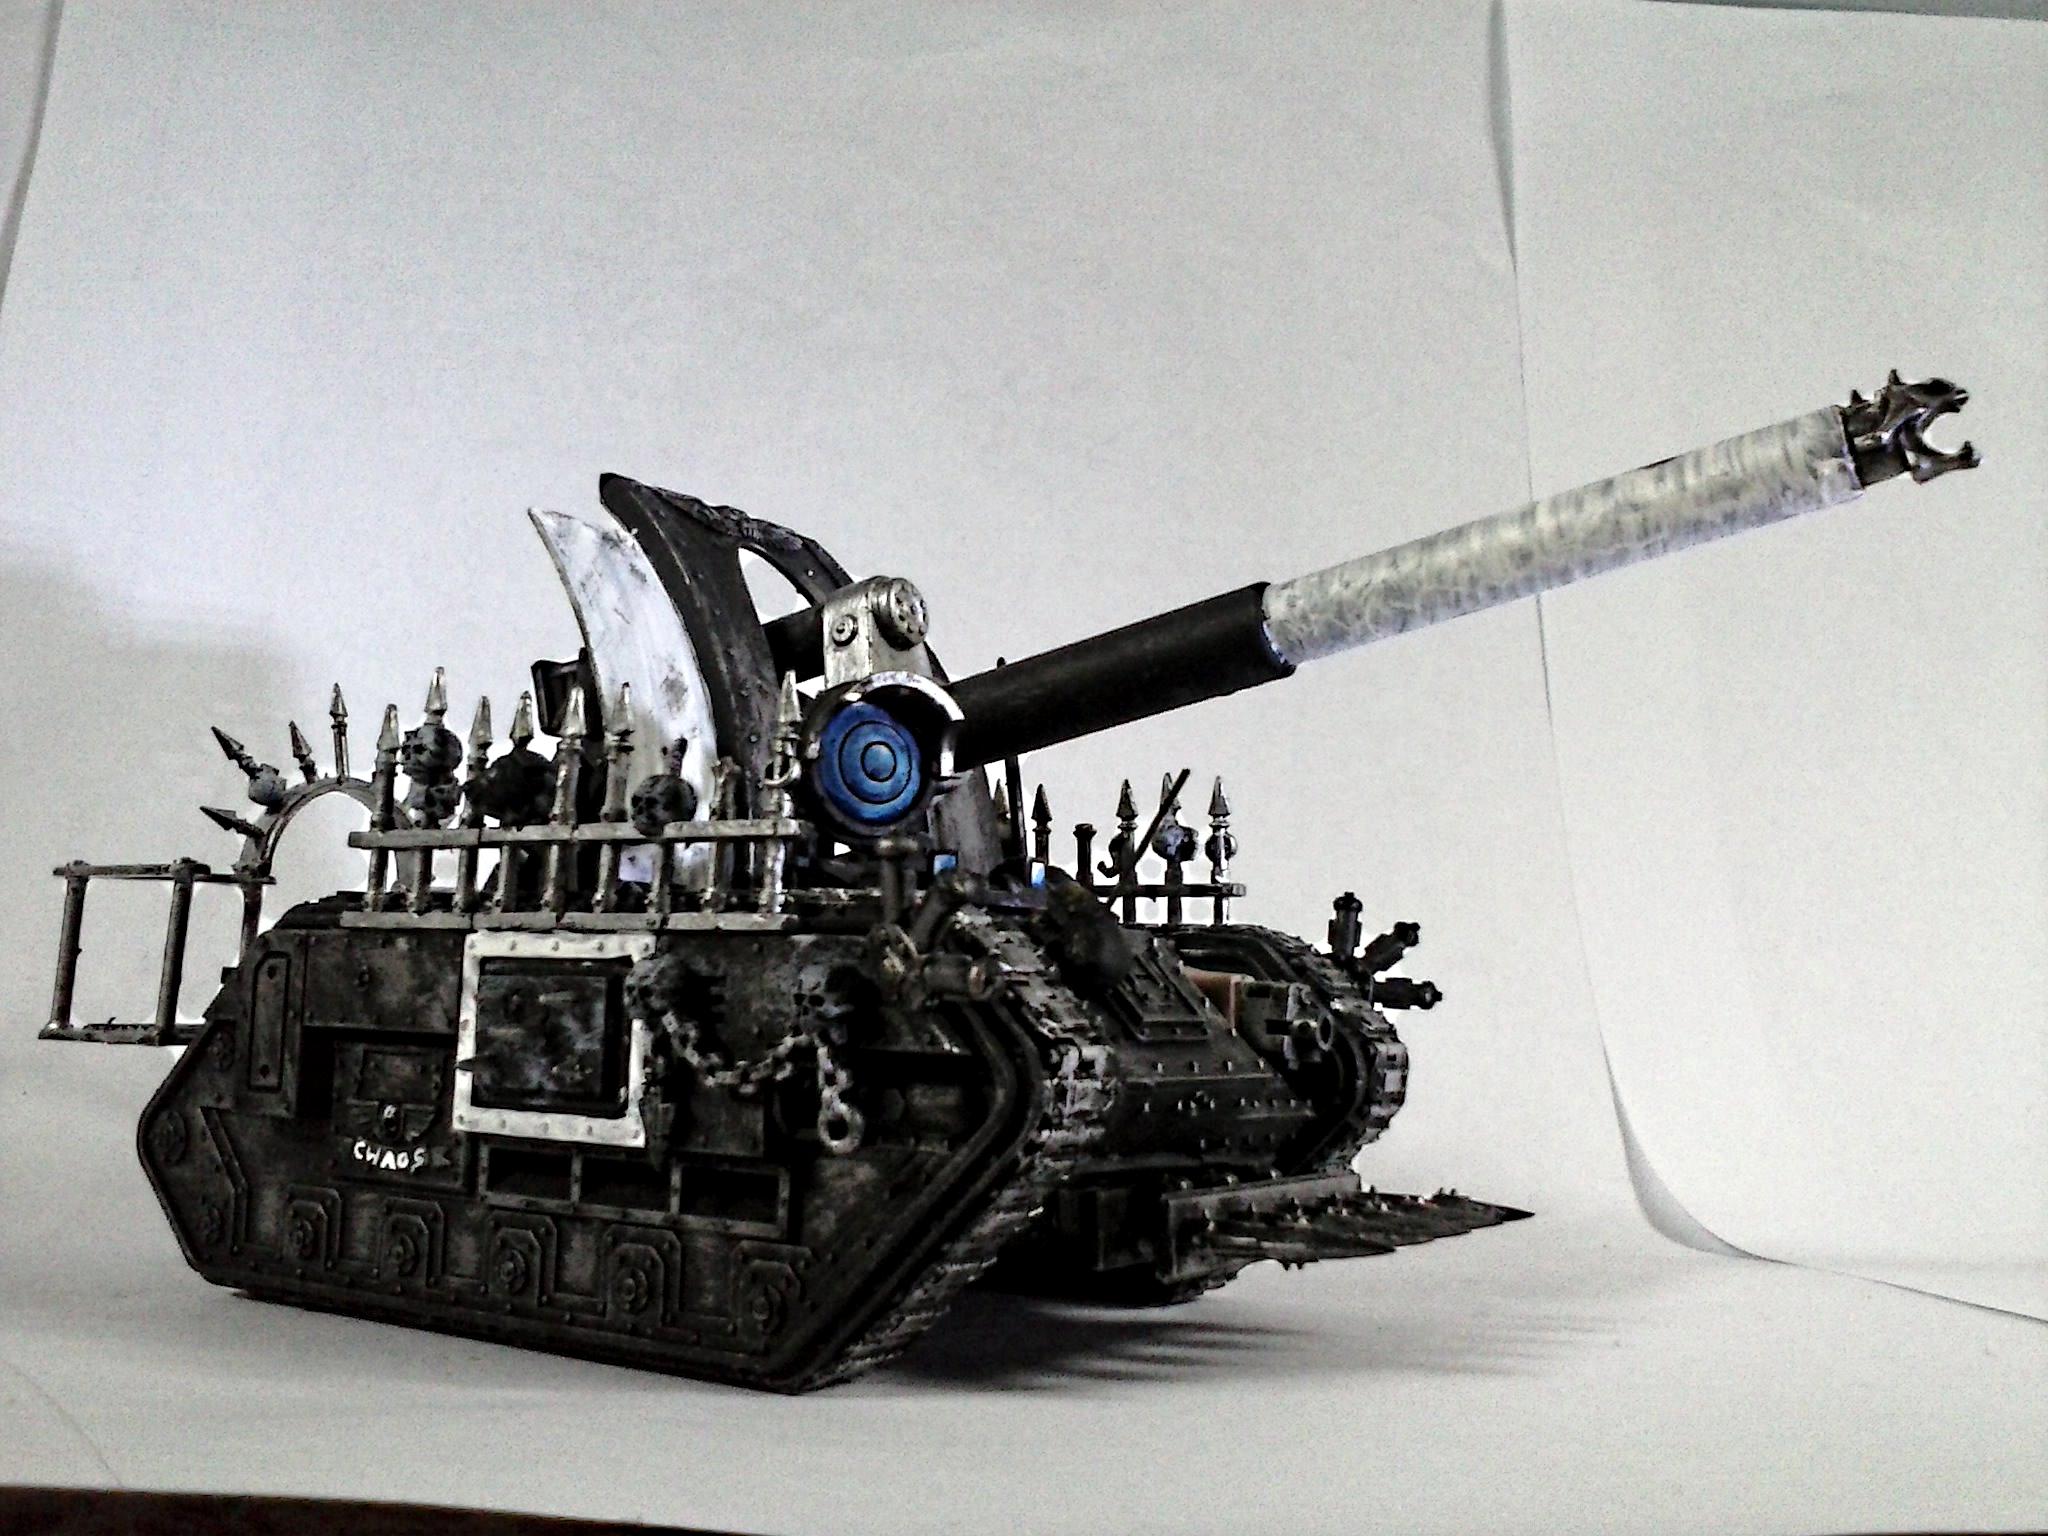 Artillery, Assault Cannon, Basilisk, Black, Blast Master, Chaos, Conversion, Crusade, Doom Siren, Earthshaker, Havocs, Heavy Bolter, Lascannon, Legion, Leman Russ, Lightening Claws, Looted, Missile Launcher, Noise, Pirate, Pirates, Plasma Cannon, Punisher, Silver, Sonic Blaster, Space, Space Marines, Spiky, Stolen., Talons, Tank, Warband, Warp, Weathered